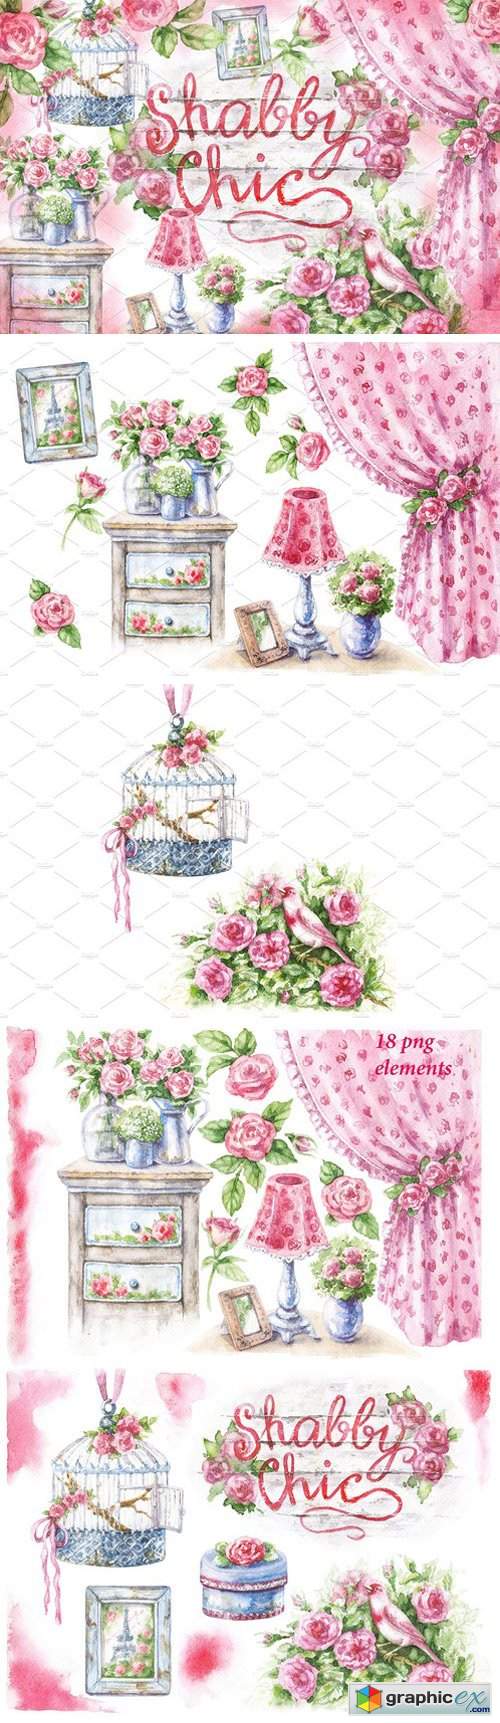 Watercolor Shabby Style Decor Items